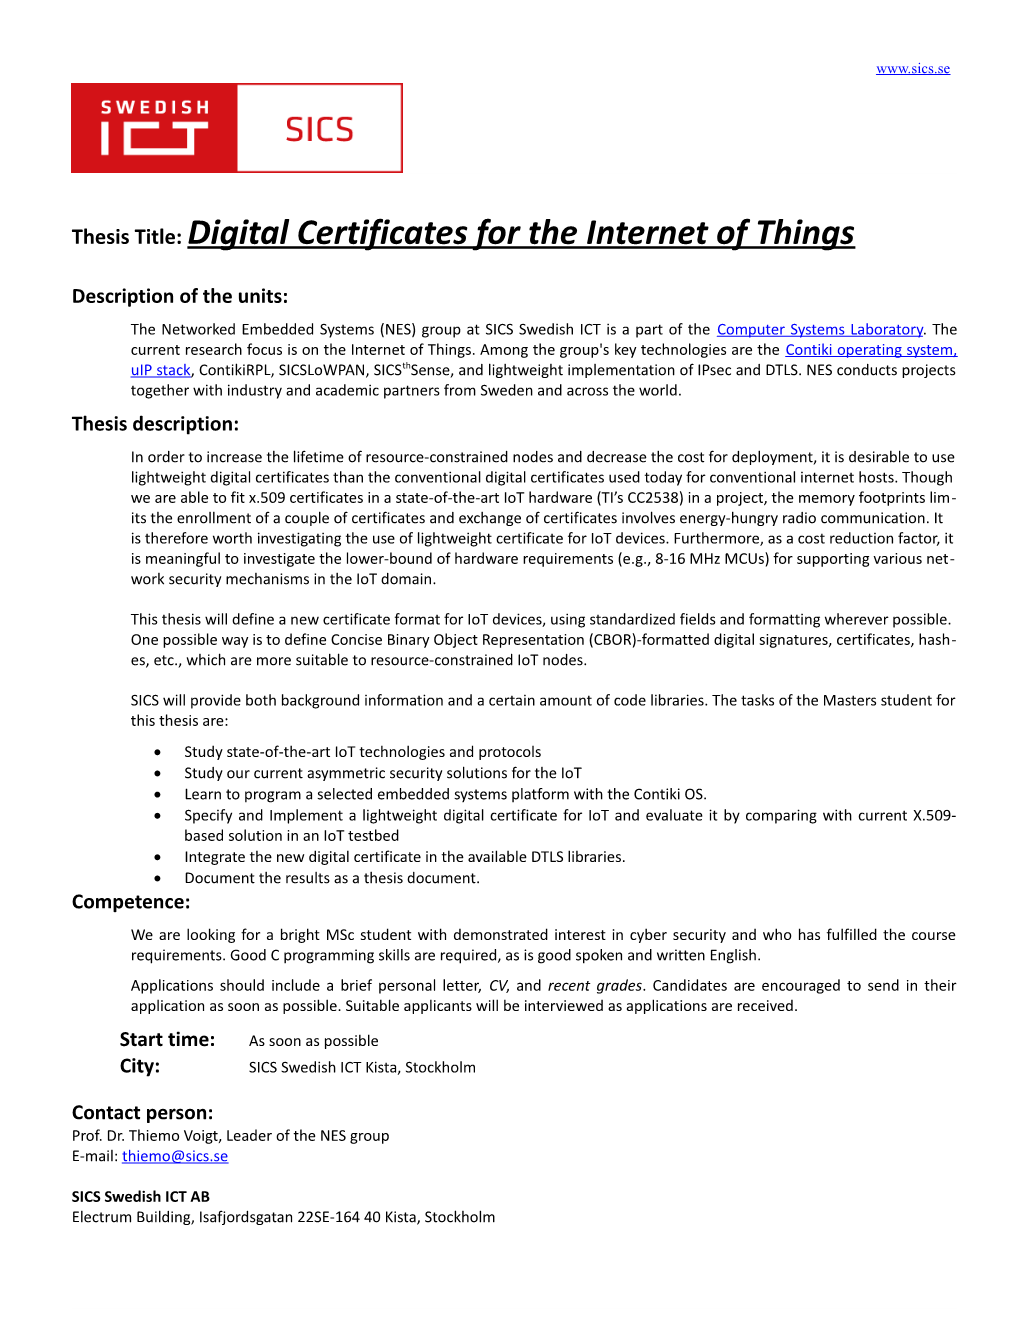 Thesis Title:Digital Certificates for the Internet of Things